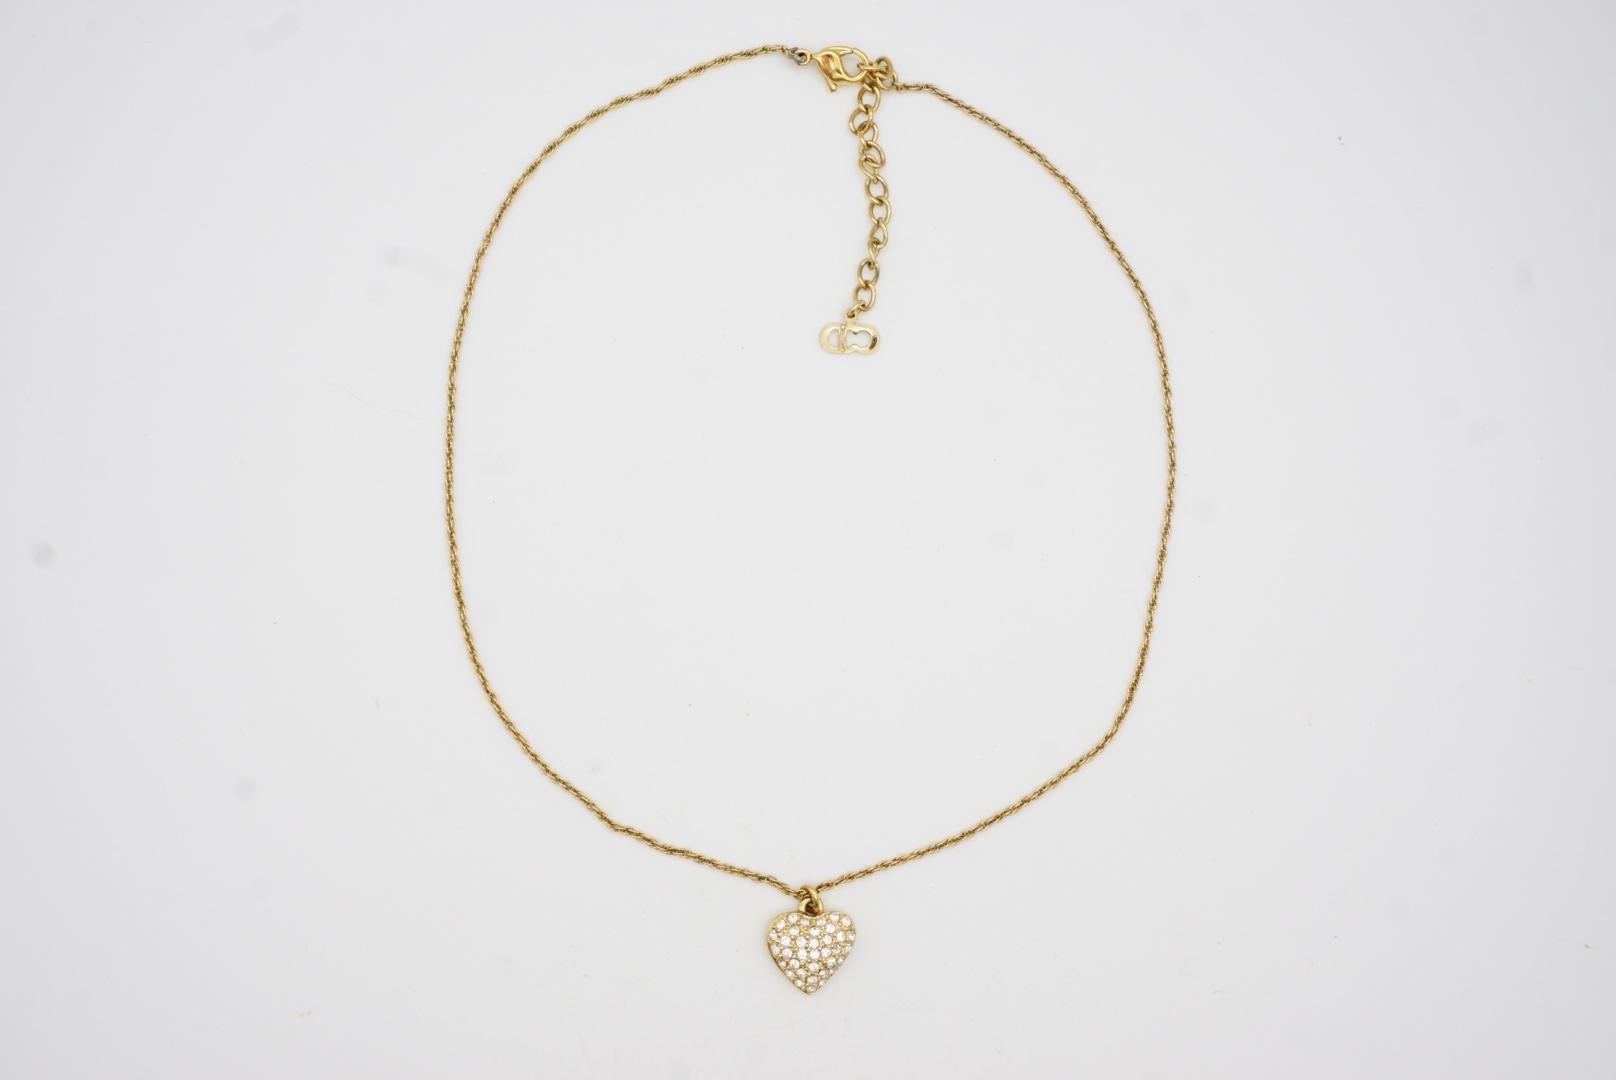 Christian Dior Vintage 1990s Shining Crystals Heart Love Pendant Gold Necklace For Sale 4